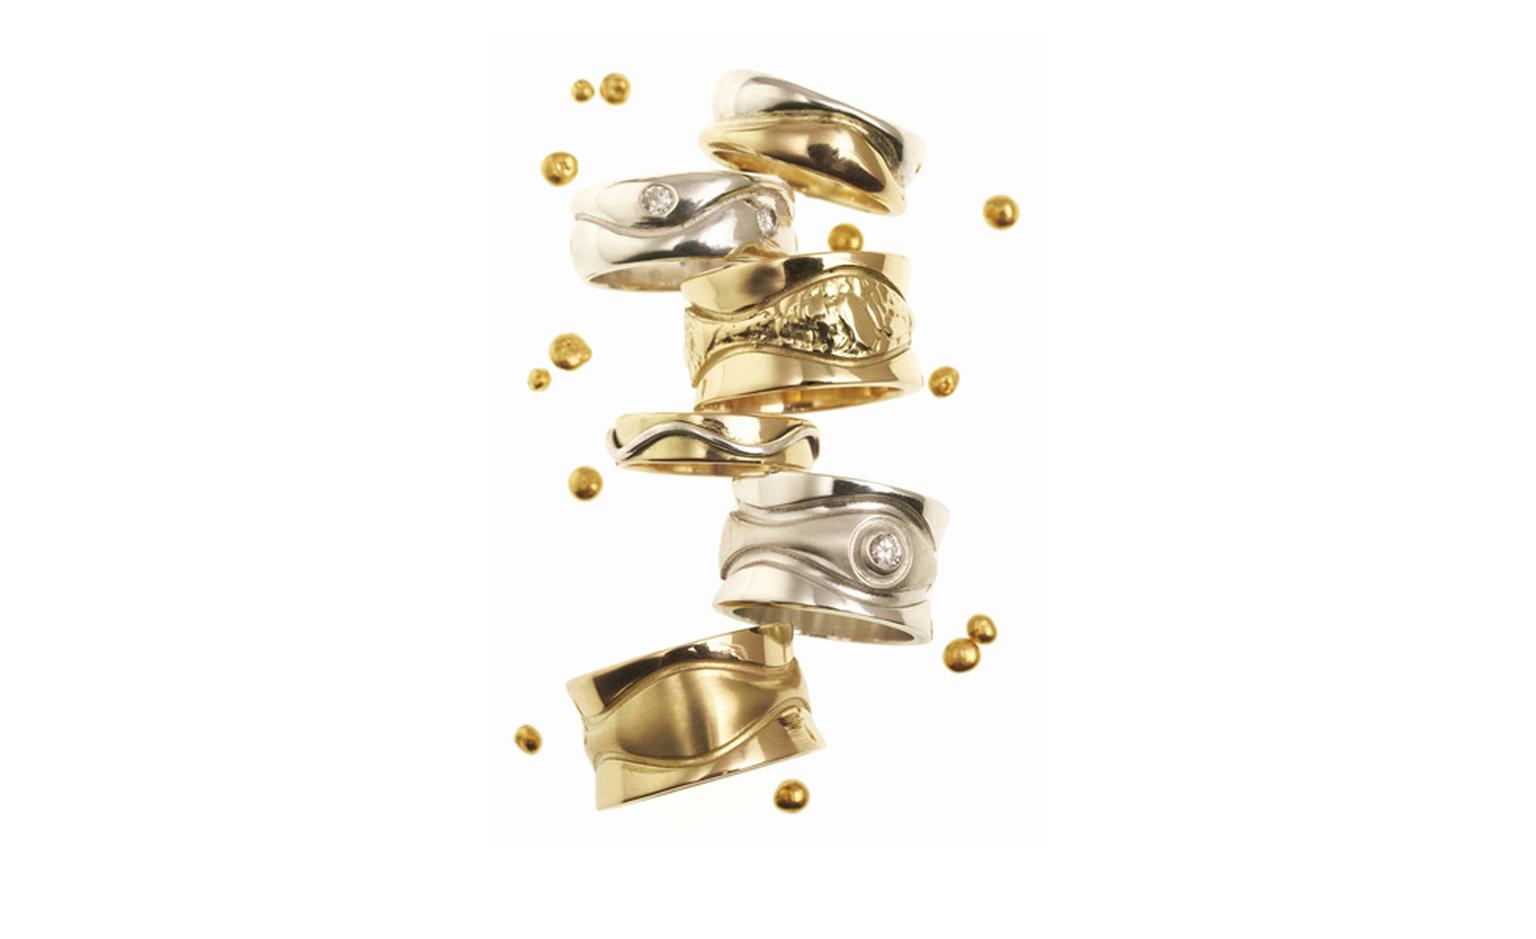 April Doubleday 18ct ethical gold rings